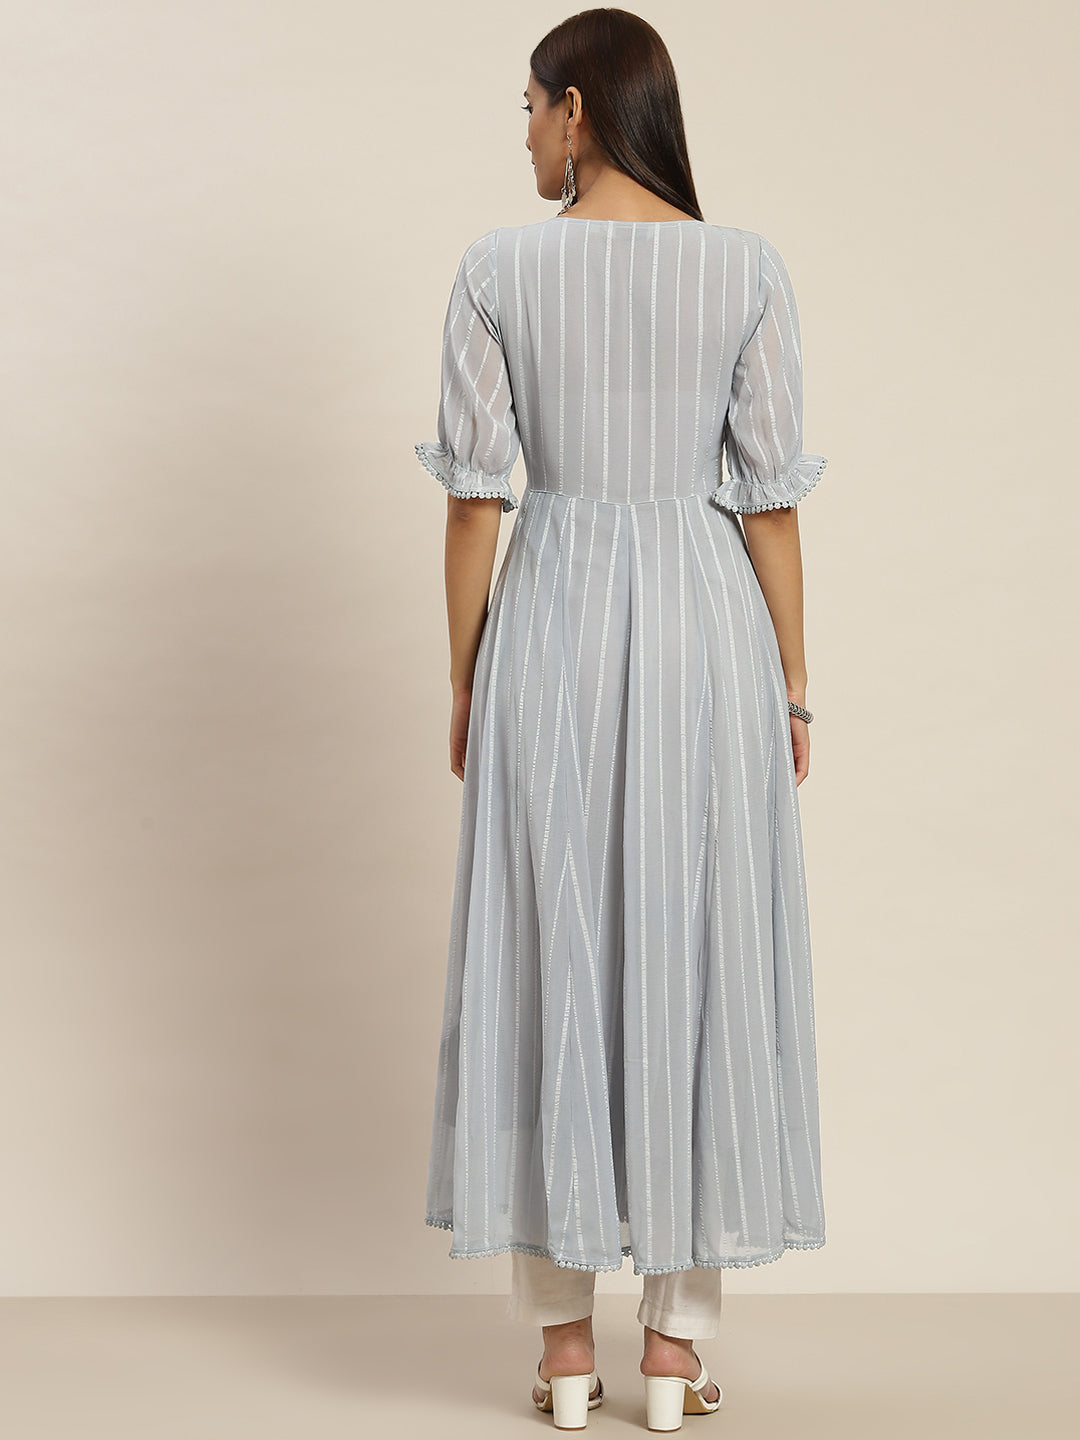 A Grey Color Striped Georgette Flared Dress With Front Gathers And Laced Up